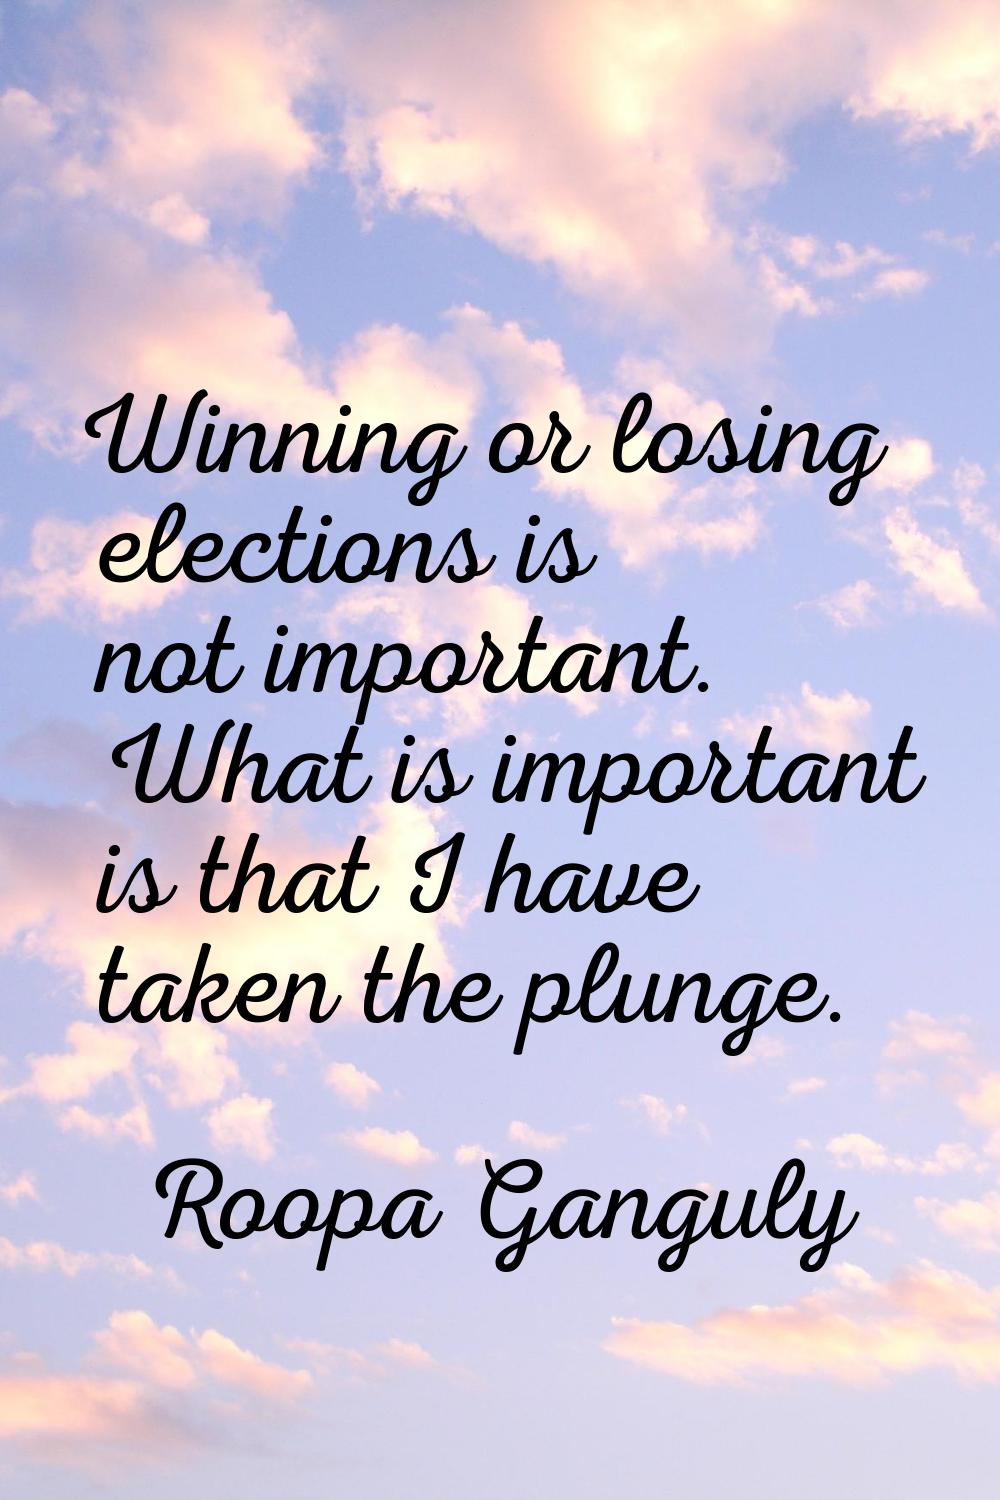 Winning or losing elections is not important. What is important is that I have taken the plunge.